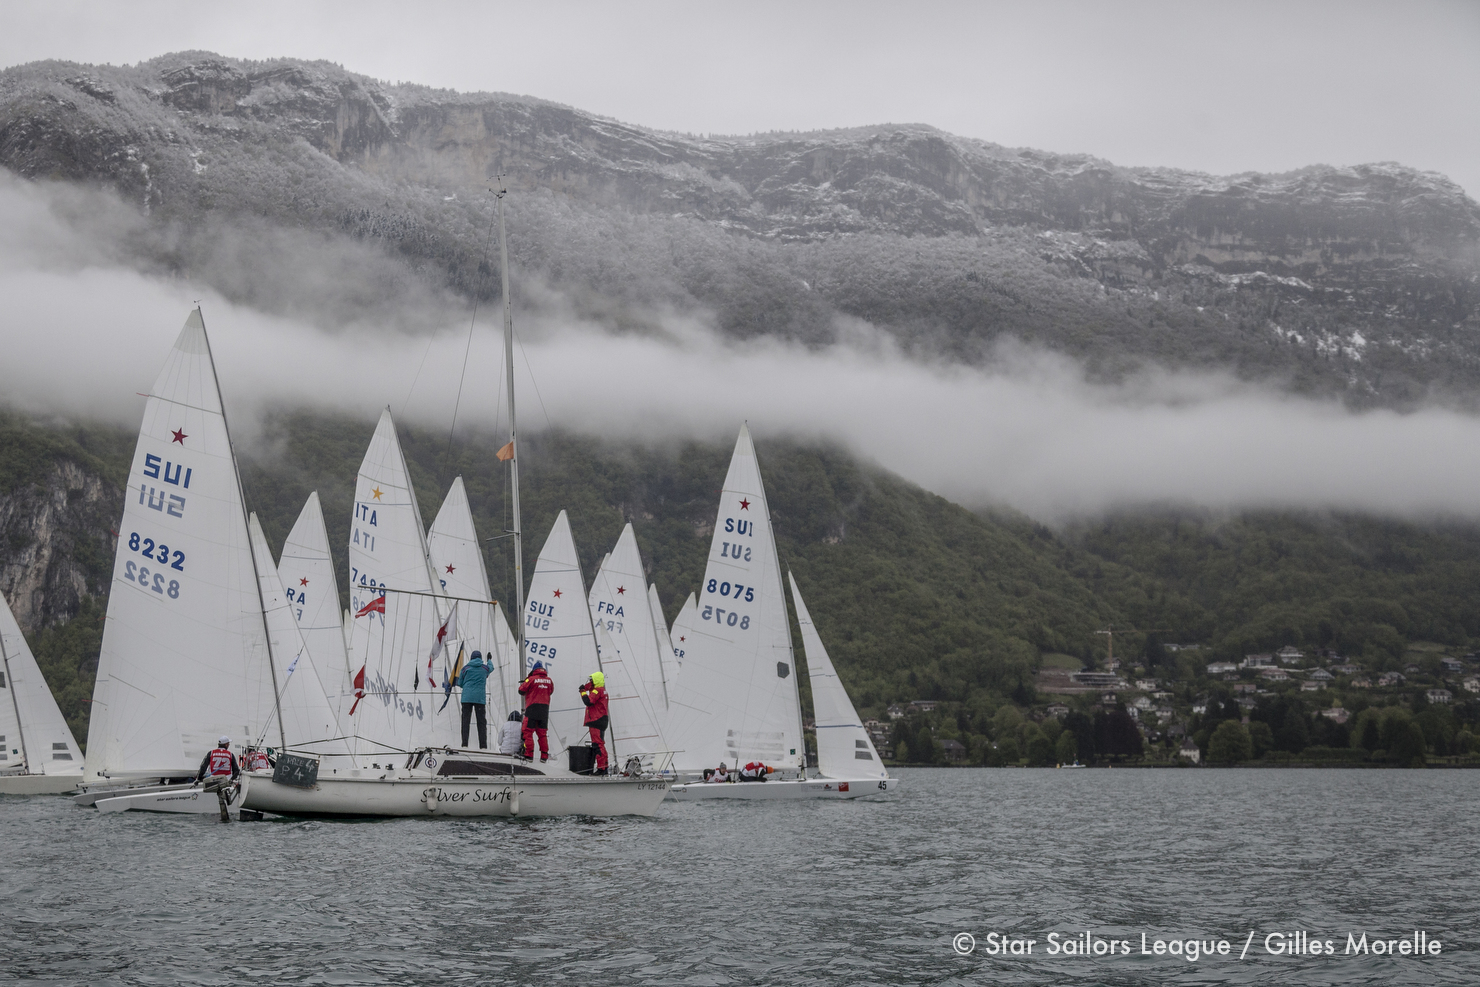  Star  District + French Championship  Annecy FRA  Final results